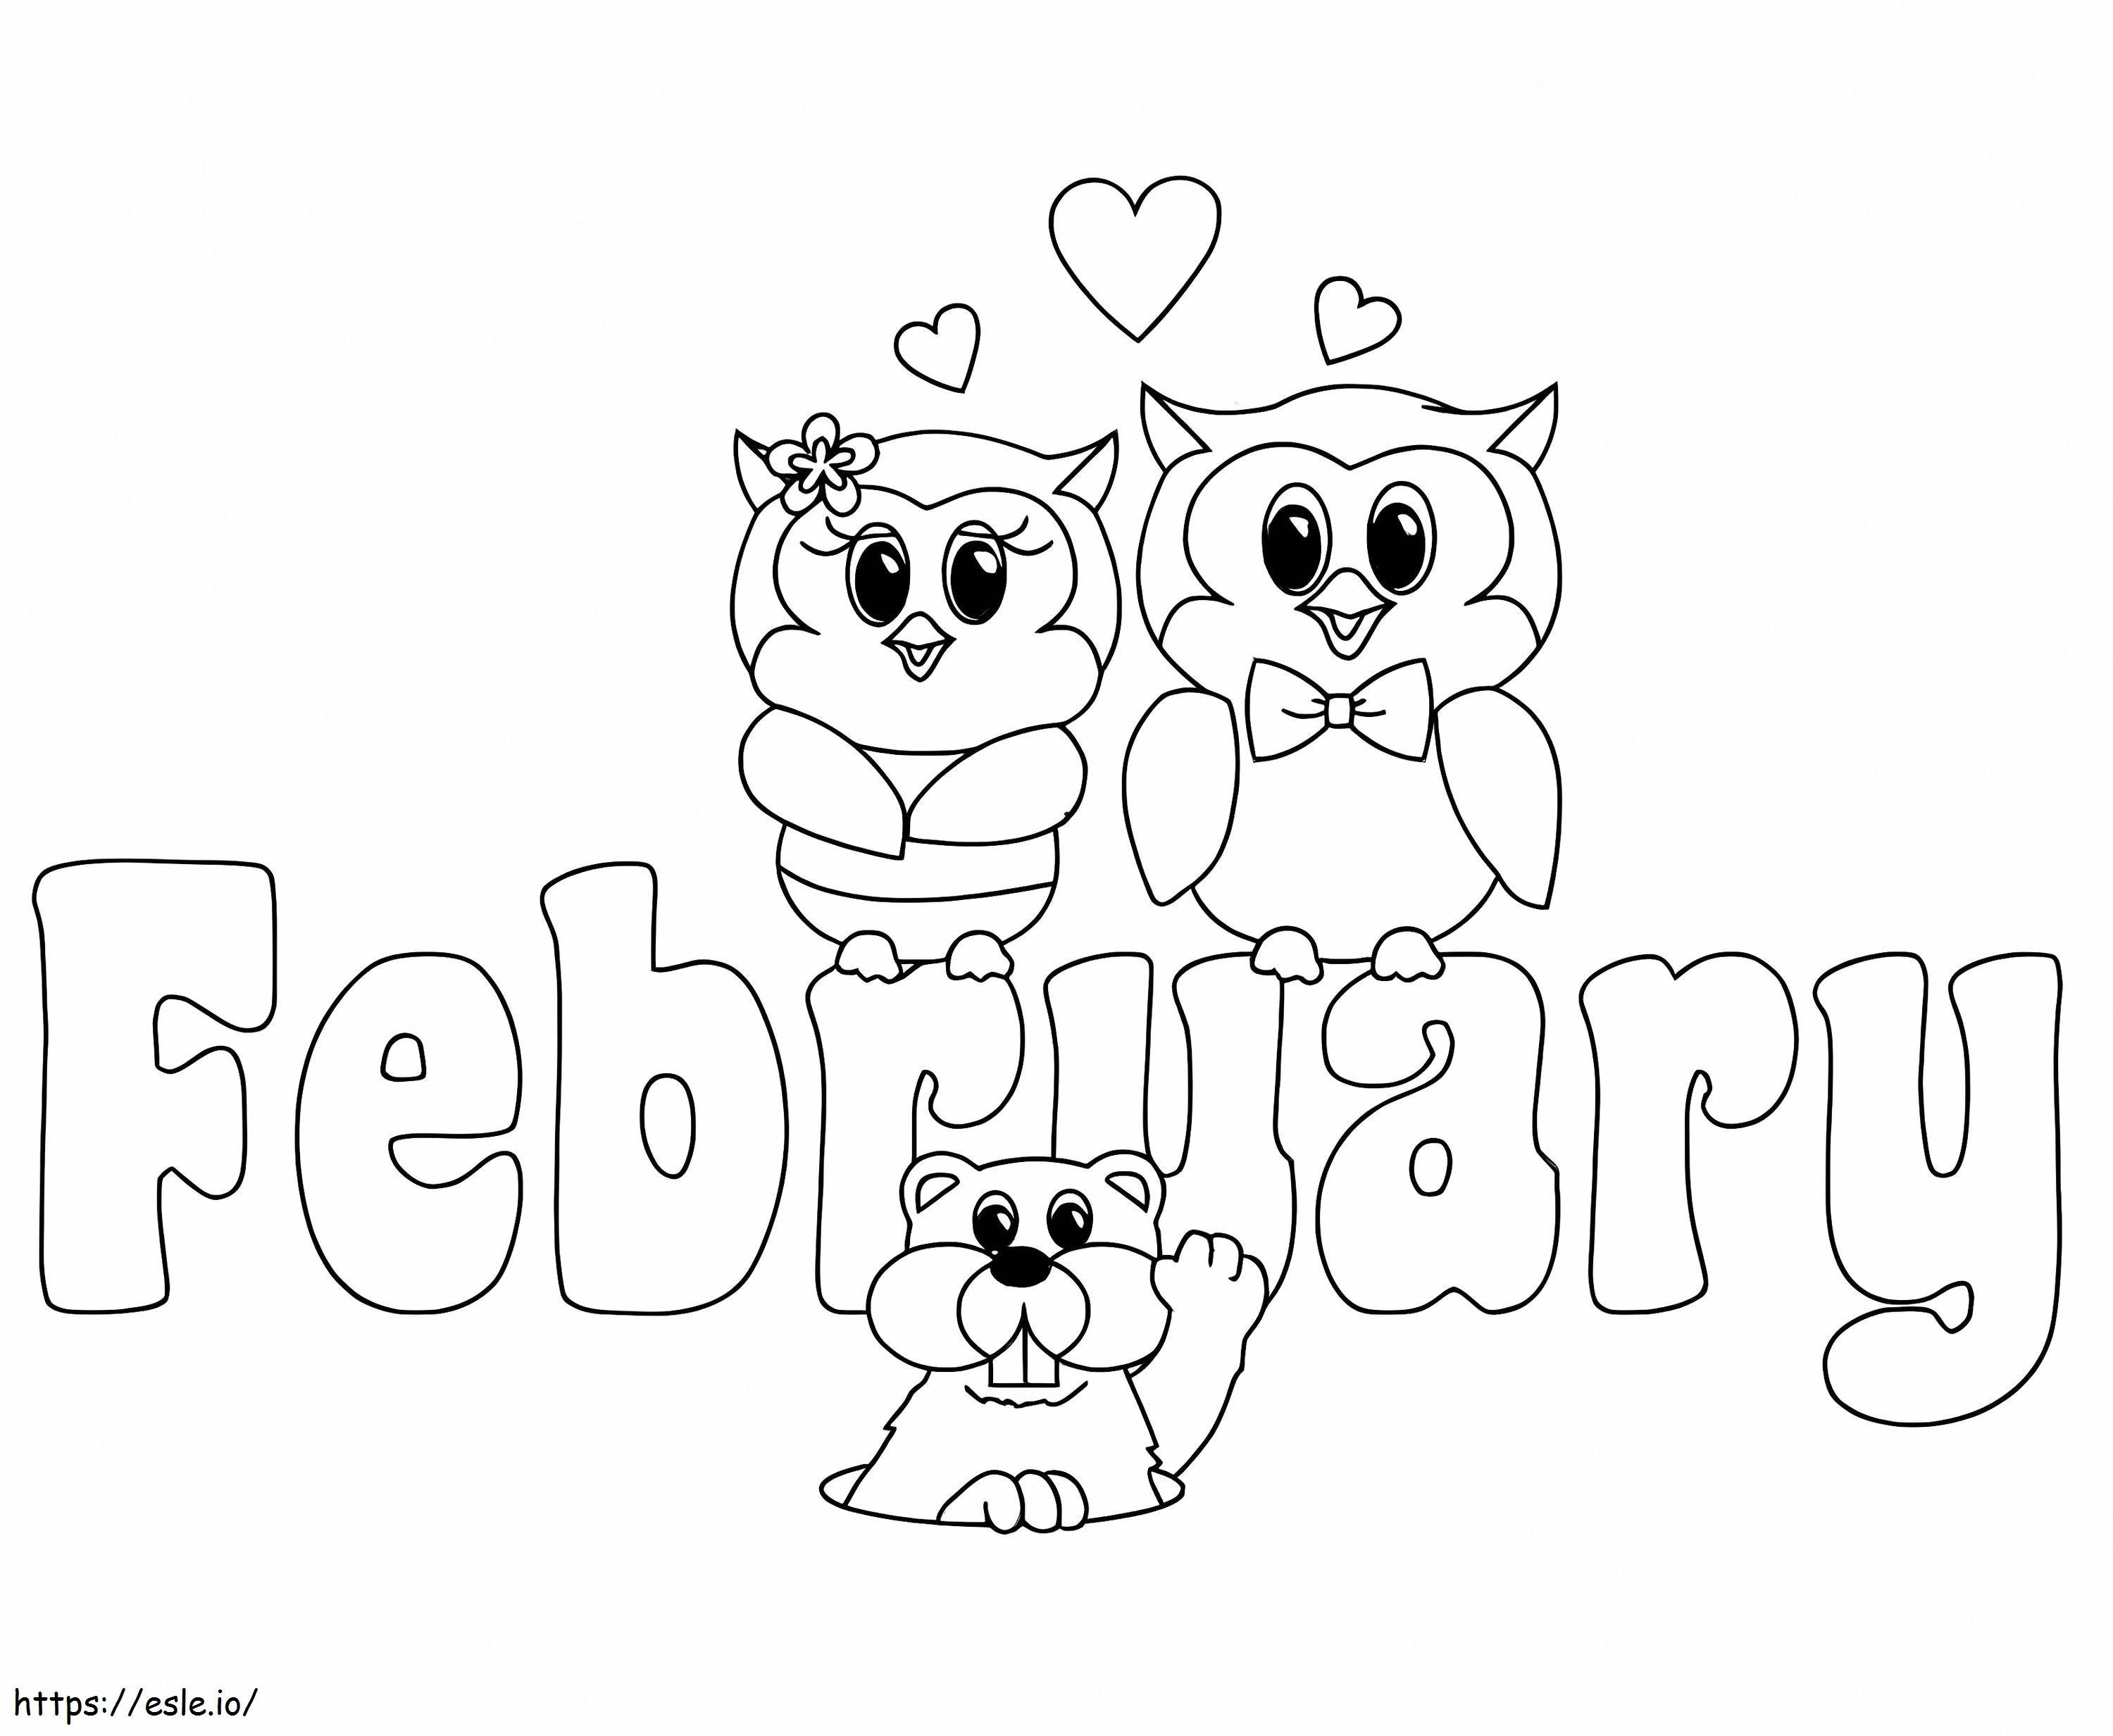 Beautiful February coloring page